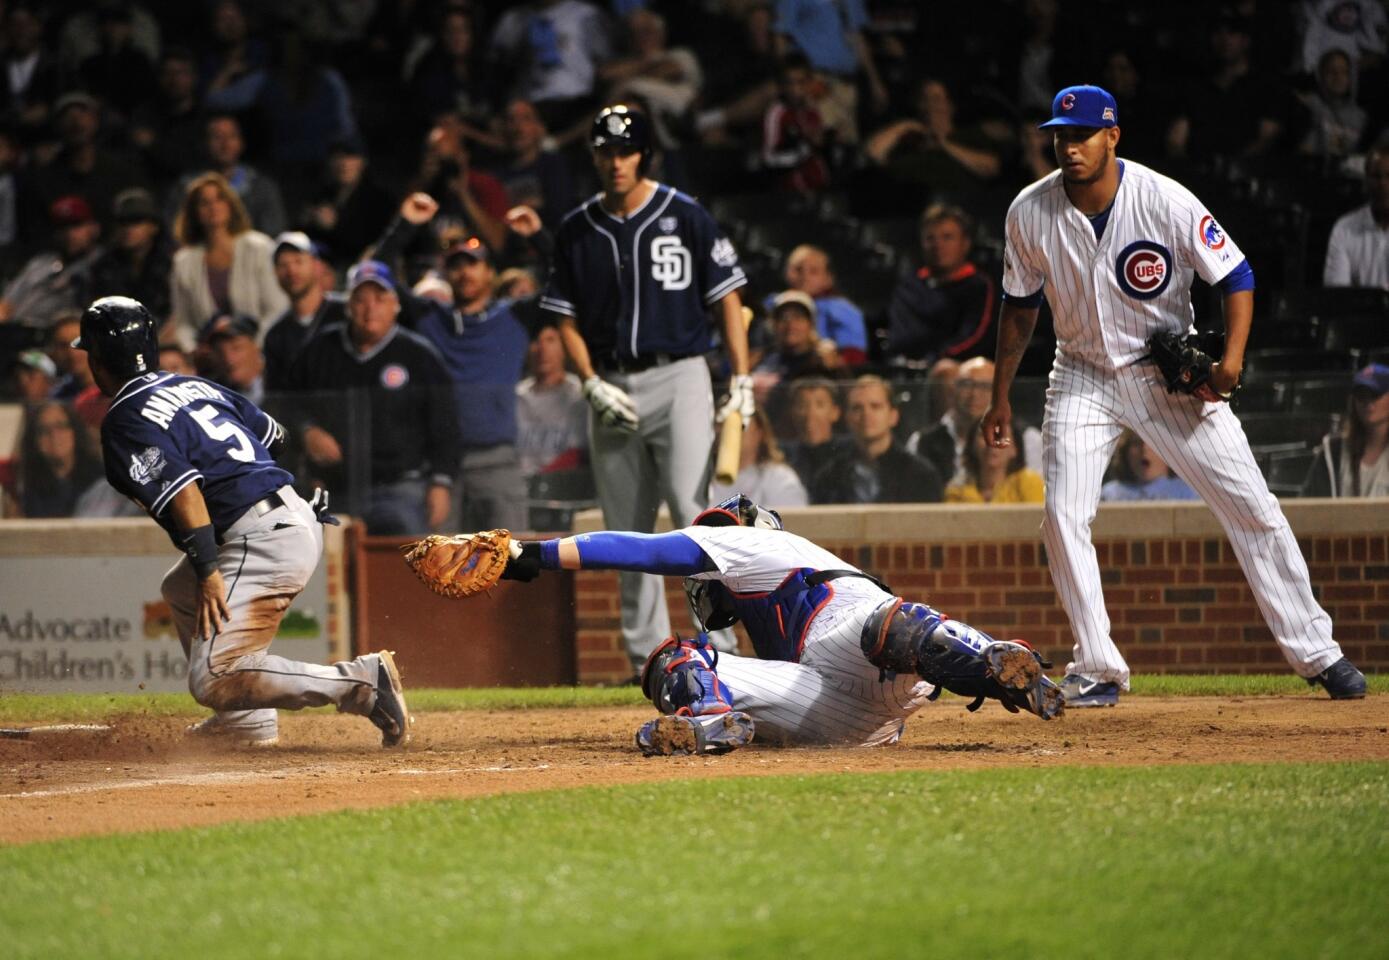 The Padres' Alexi Amarista scores as John Baker makes a late tag during the ninth inning.